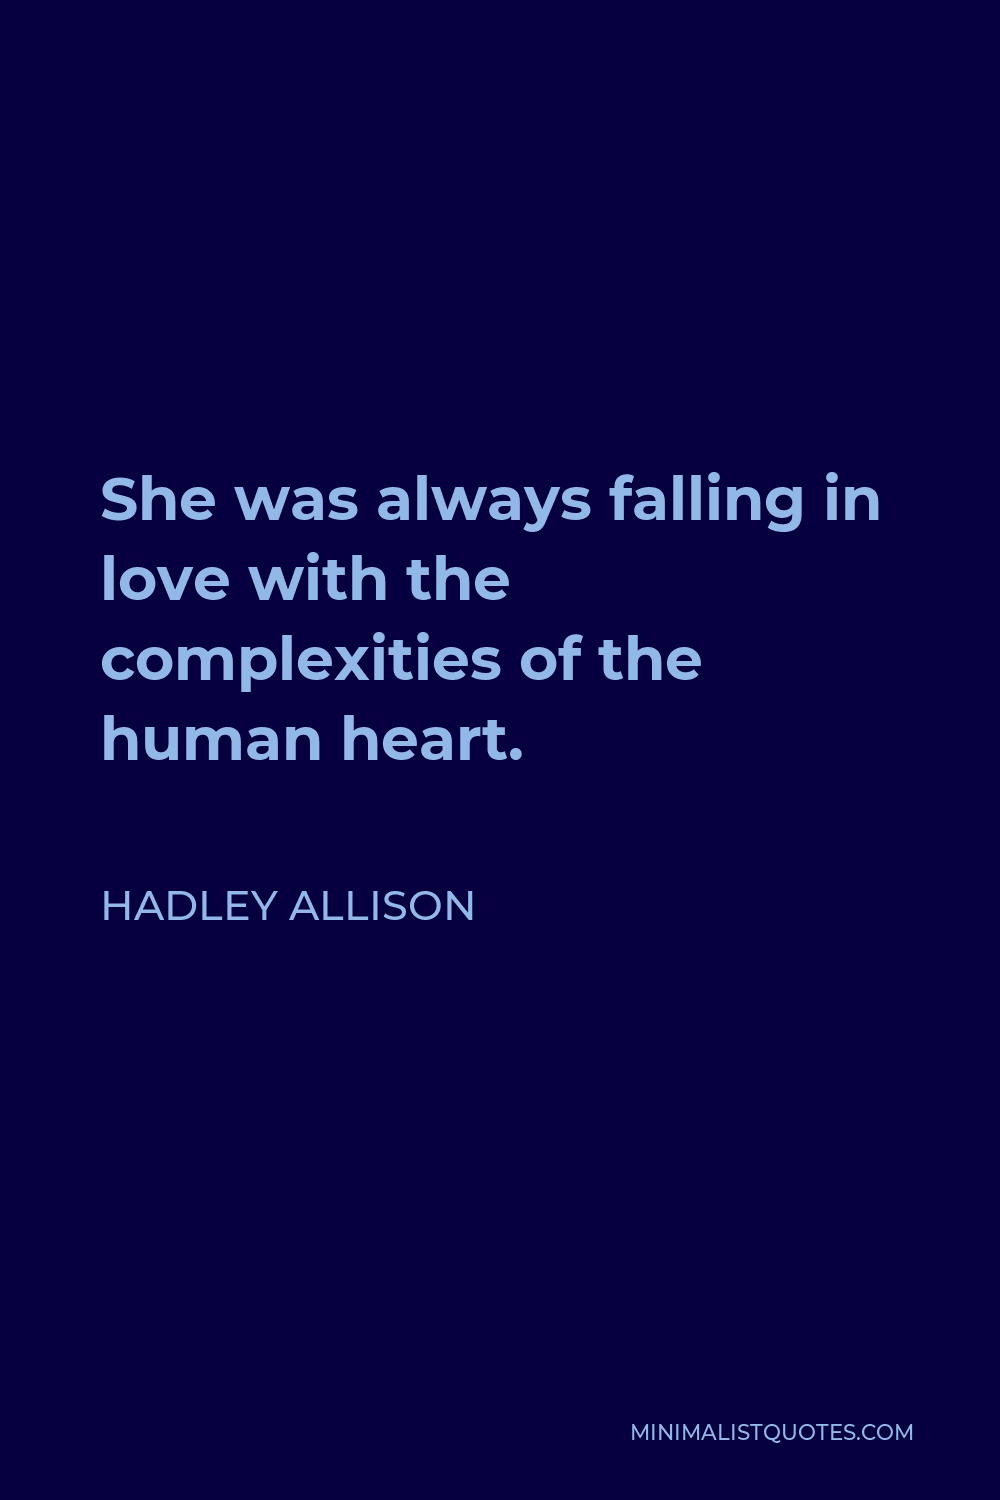 Hadley Allison Quote - She was always falling in love with the complexities of the human heart.